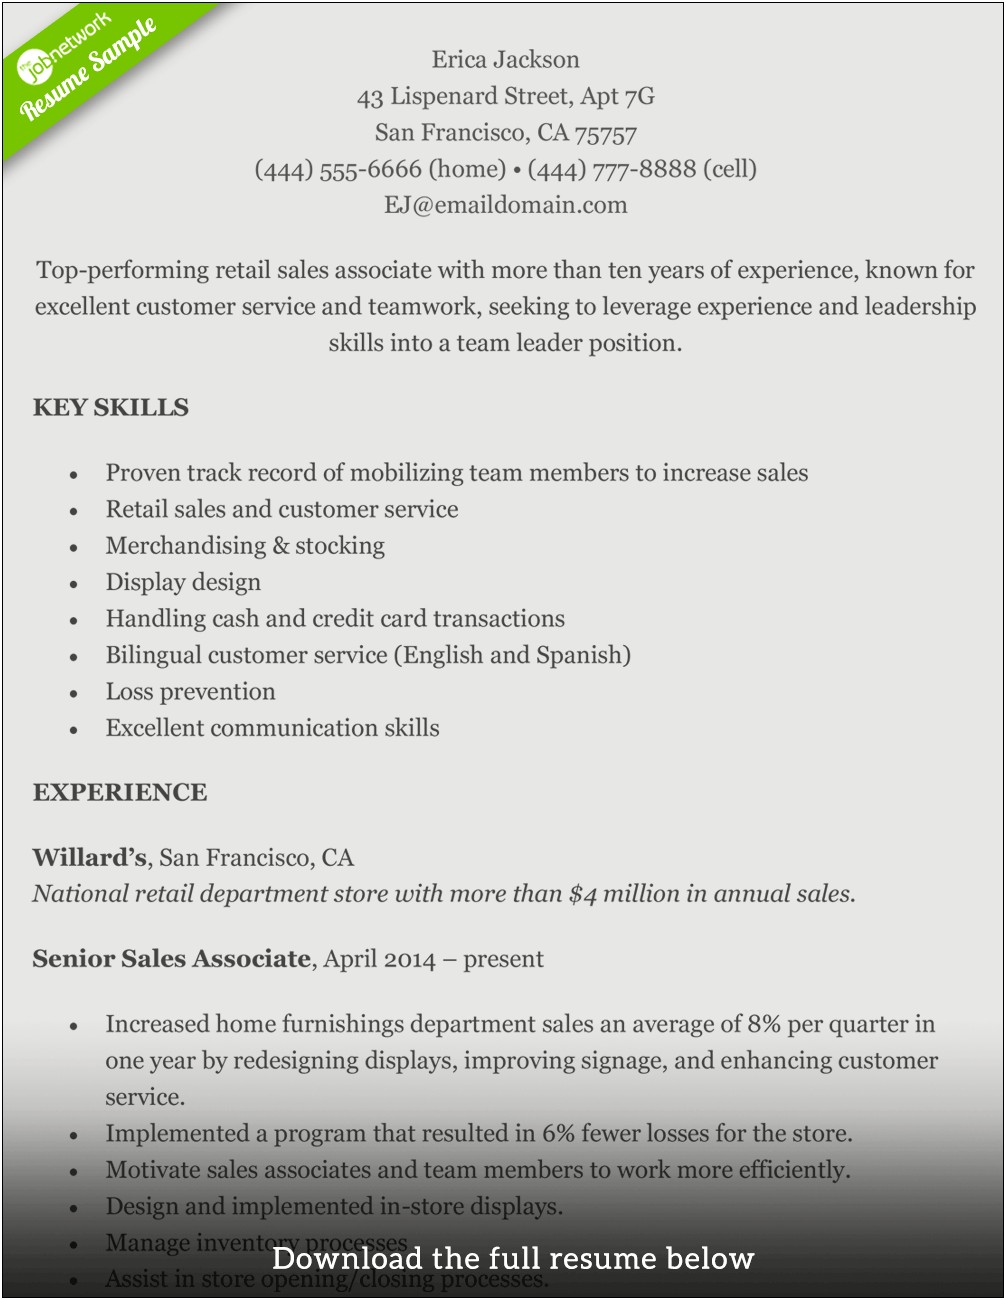 Skills For Resume In Phone Retail